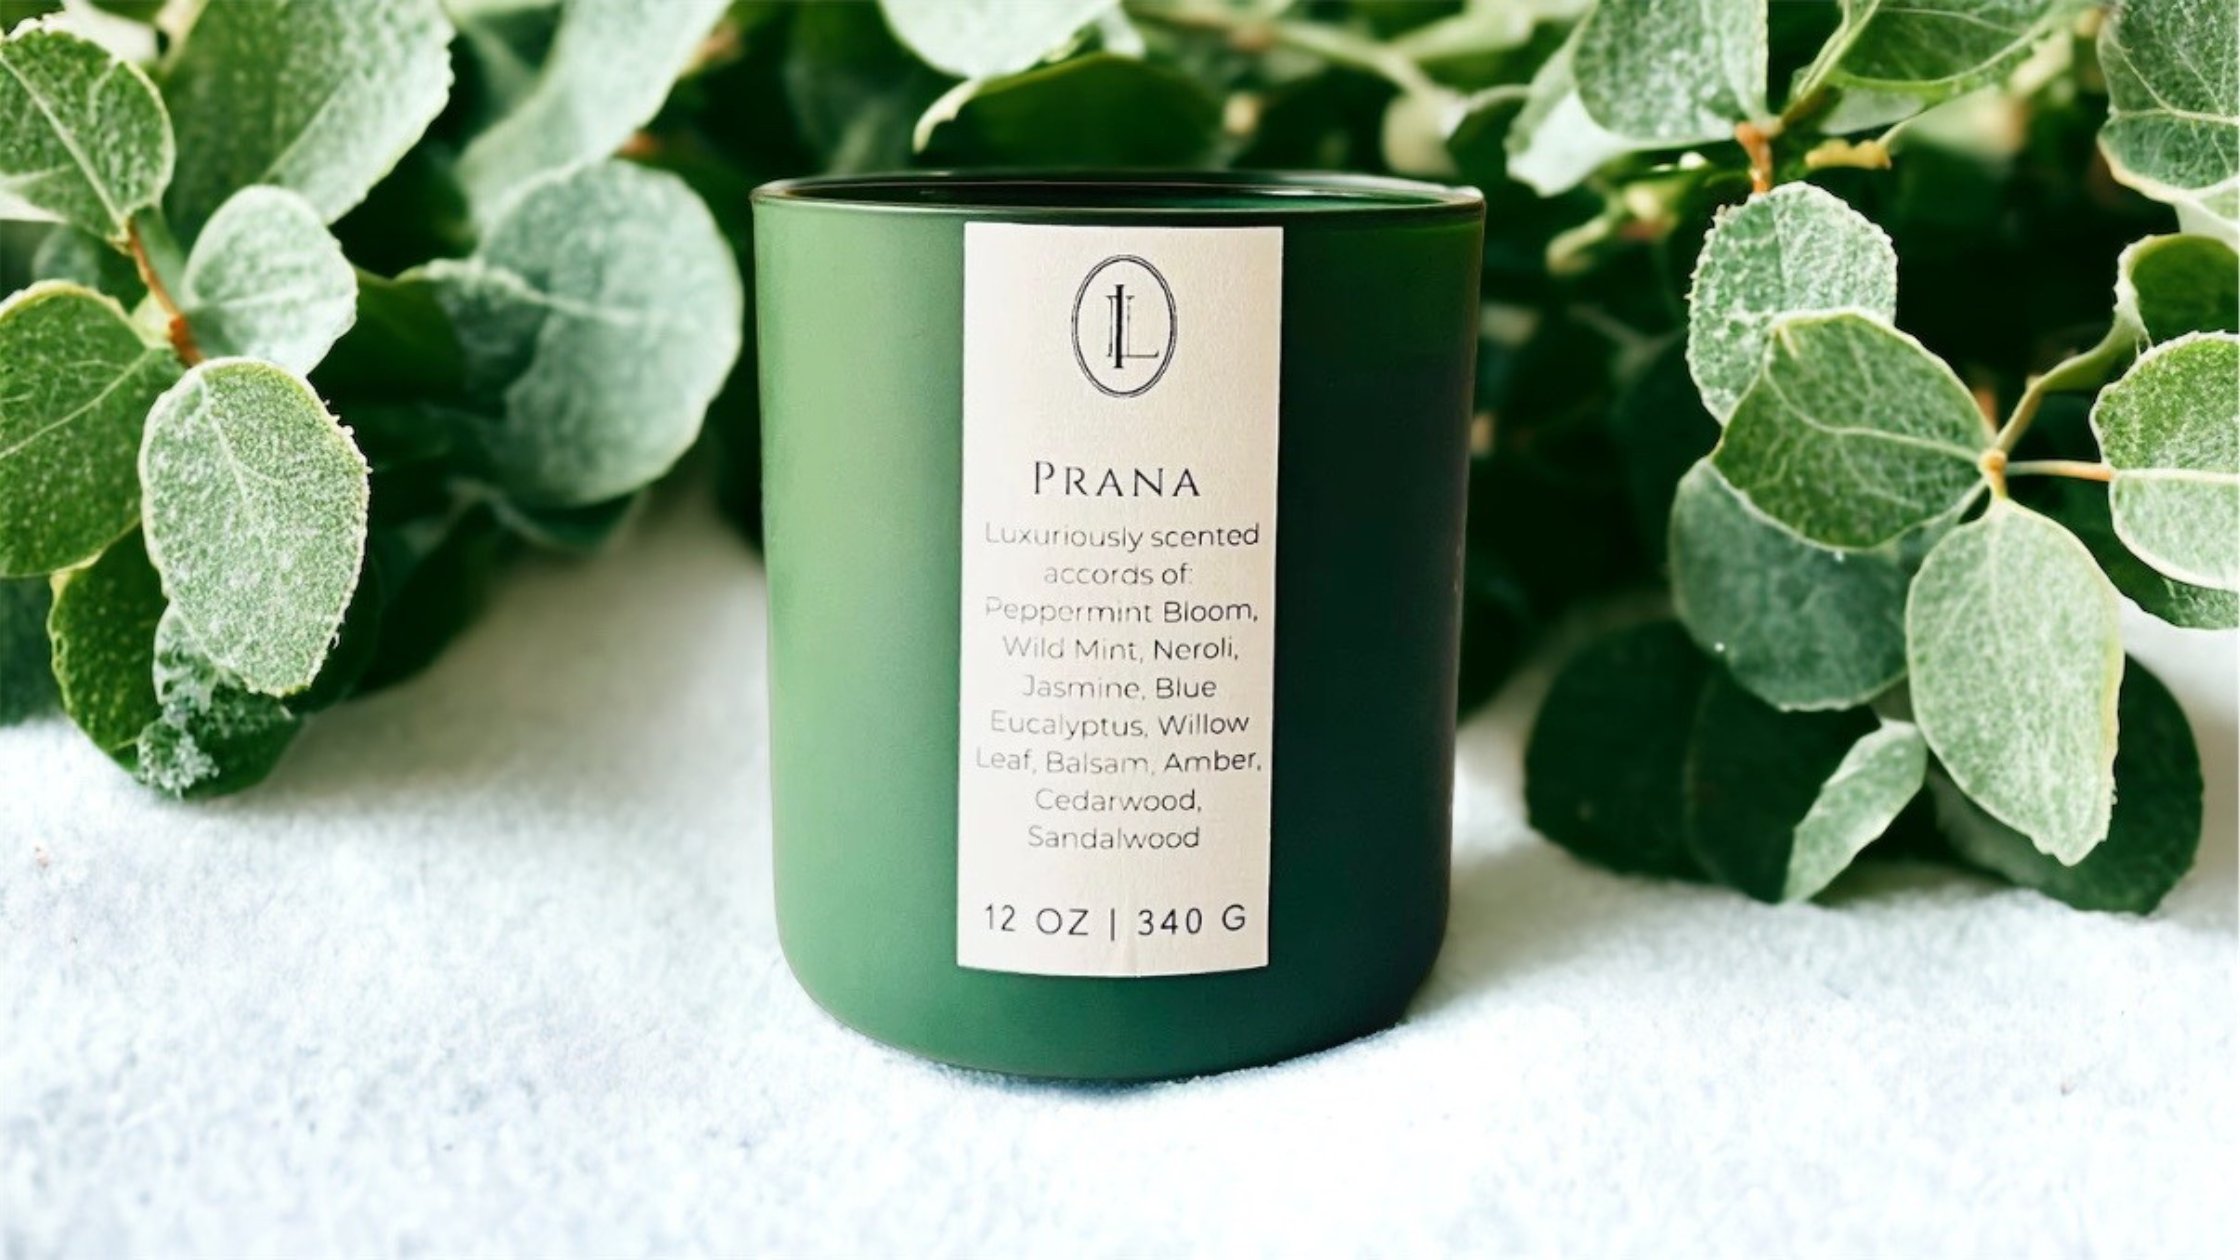 image of Prana candle sitting on snow with eucalyptus